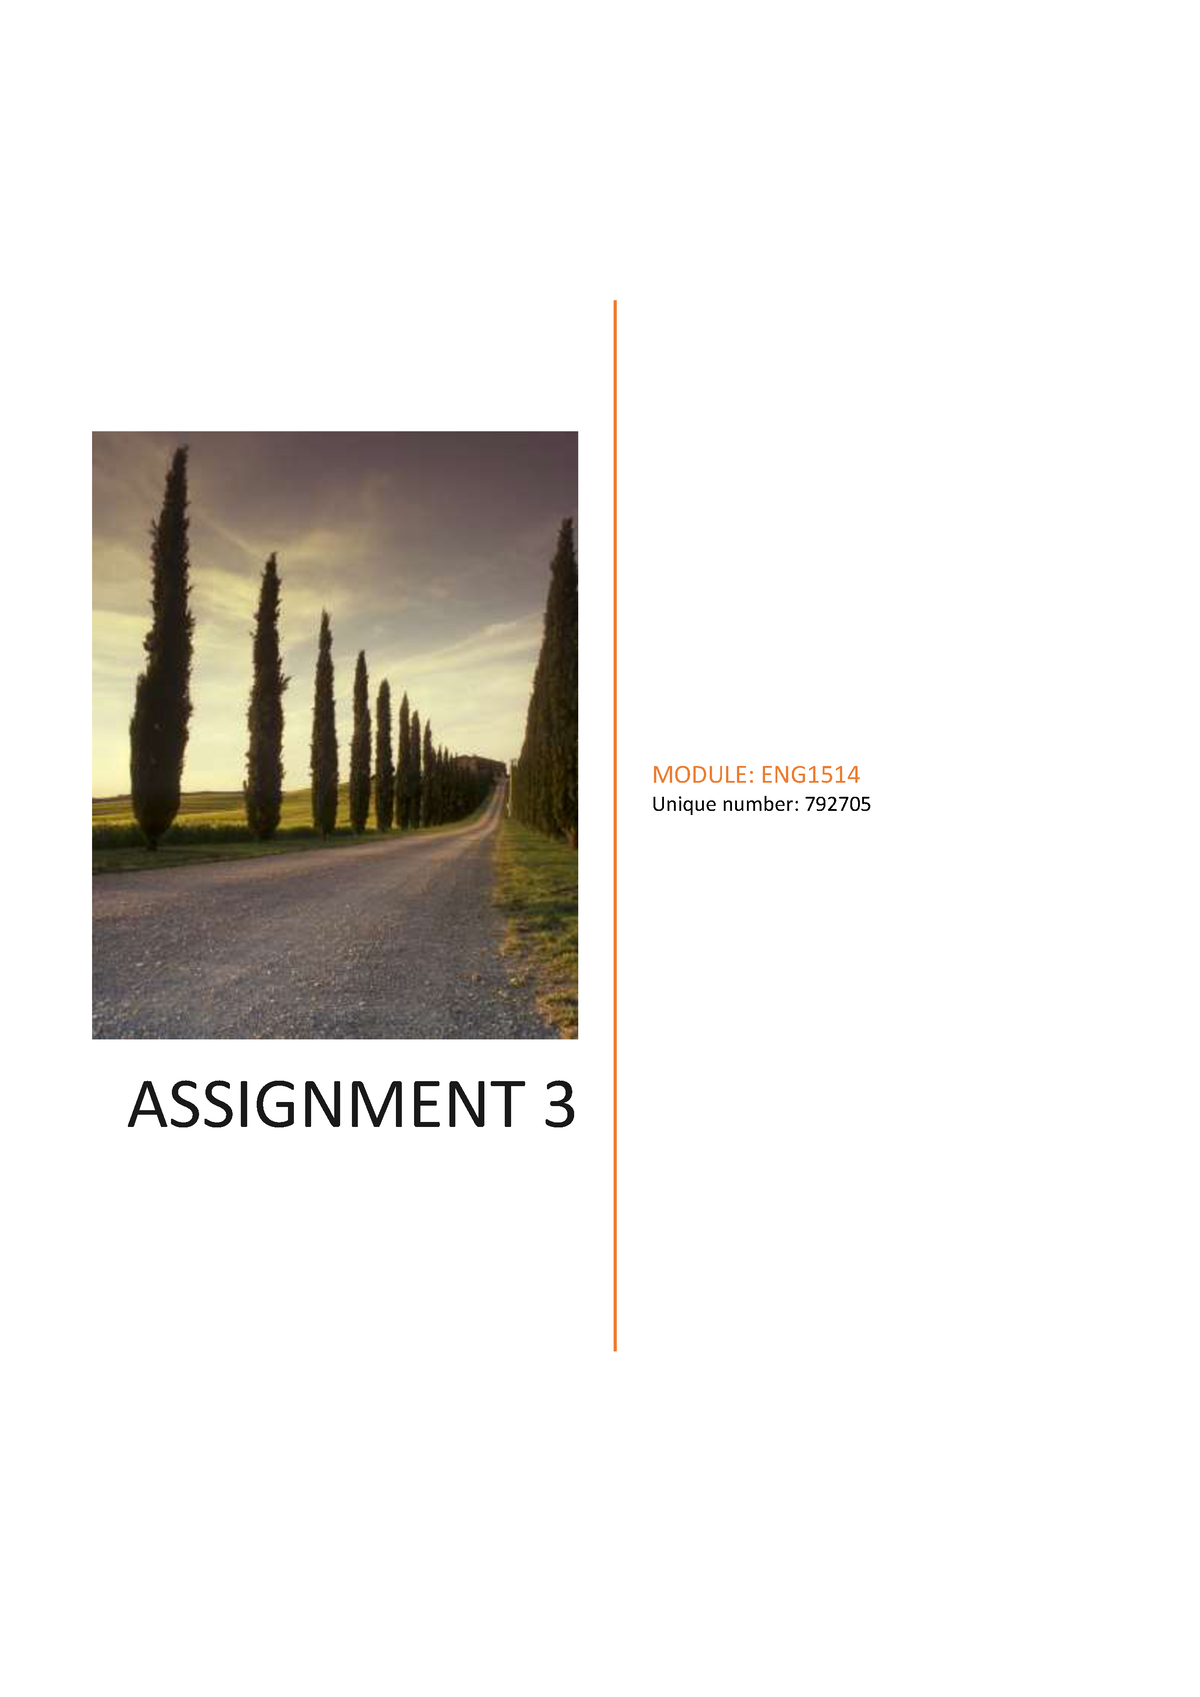 english 2611 assignment 3